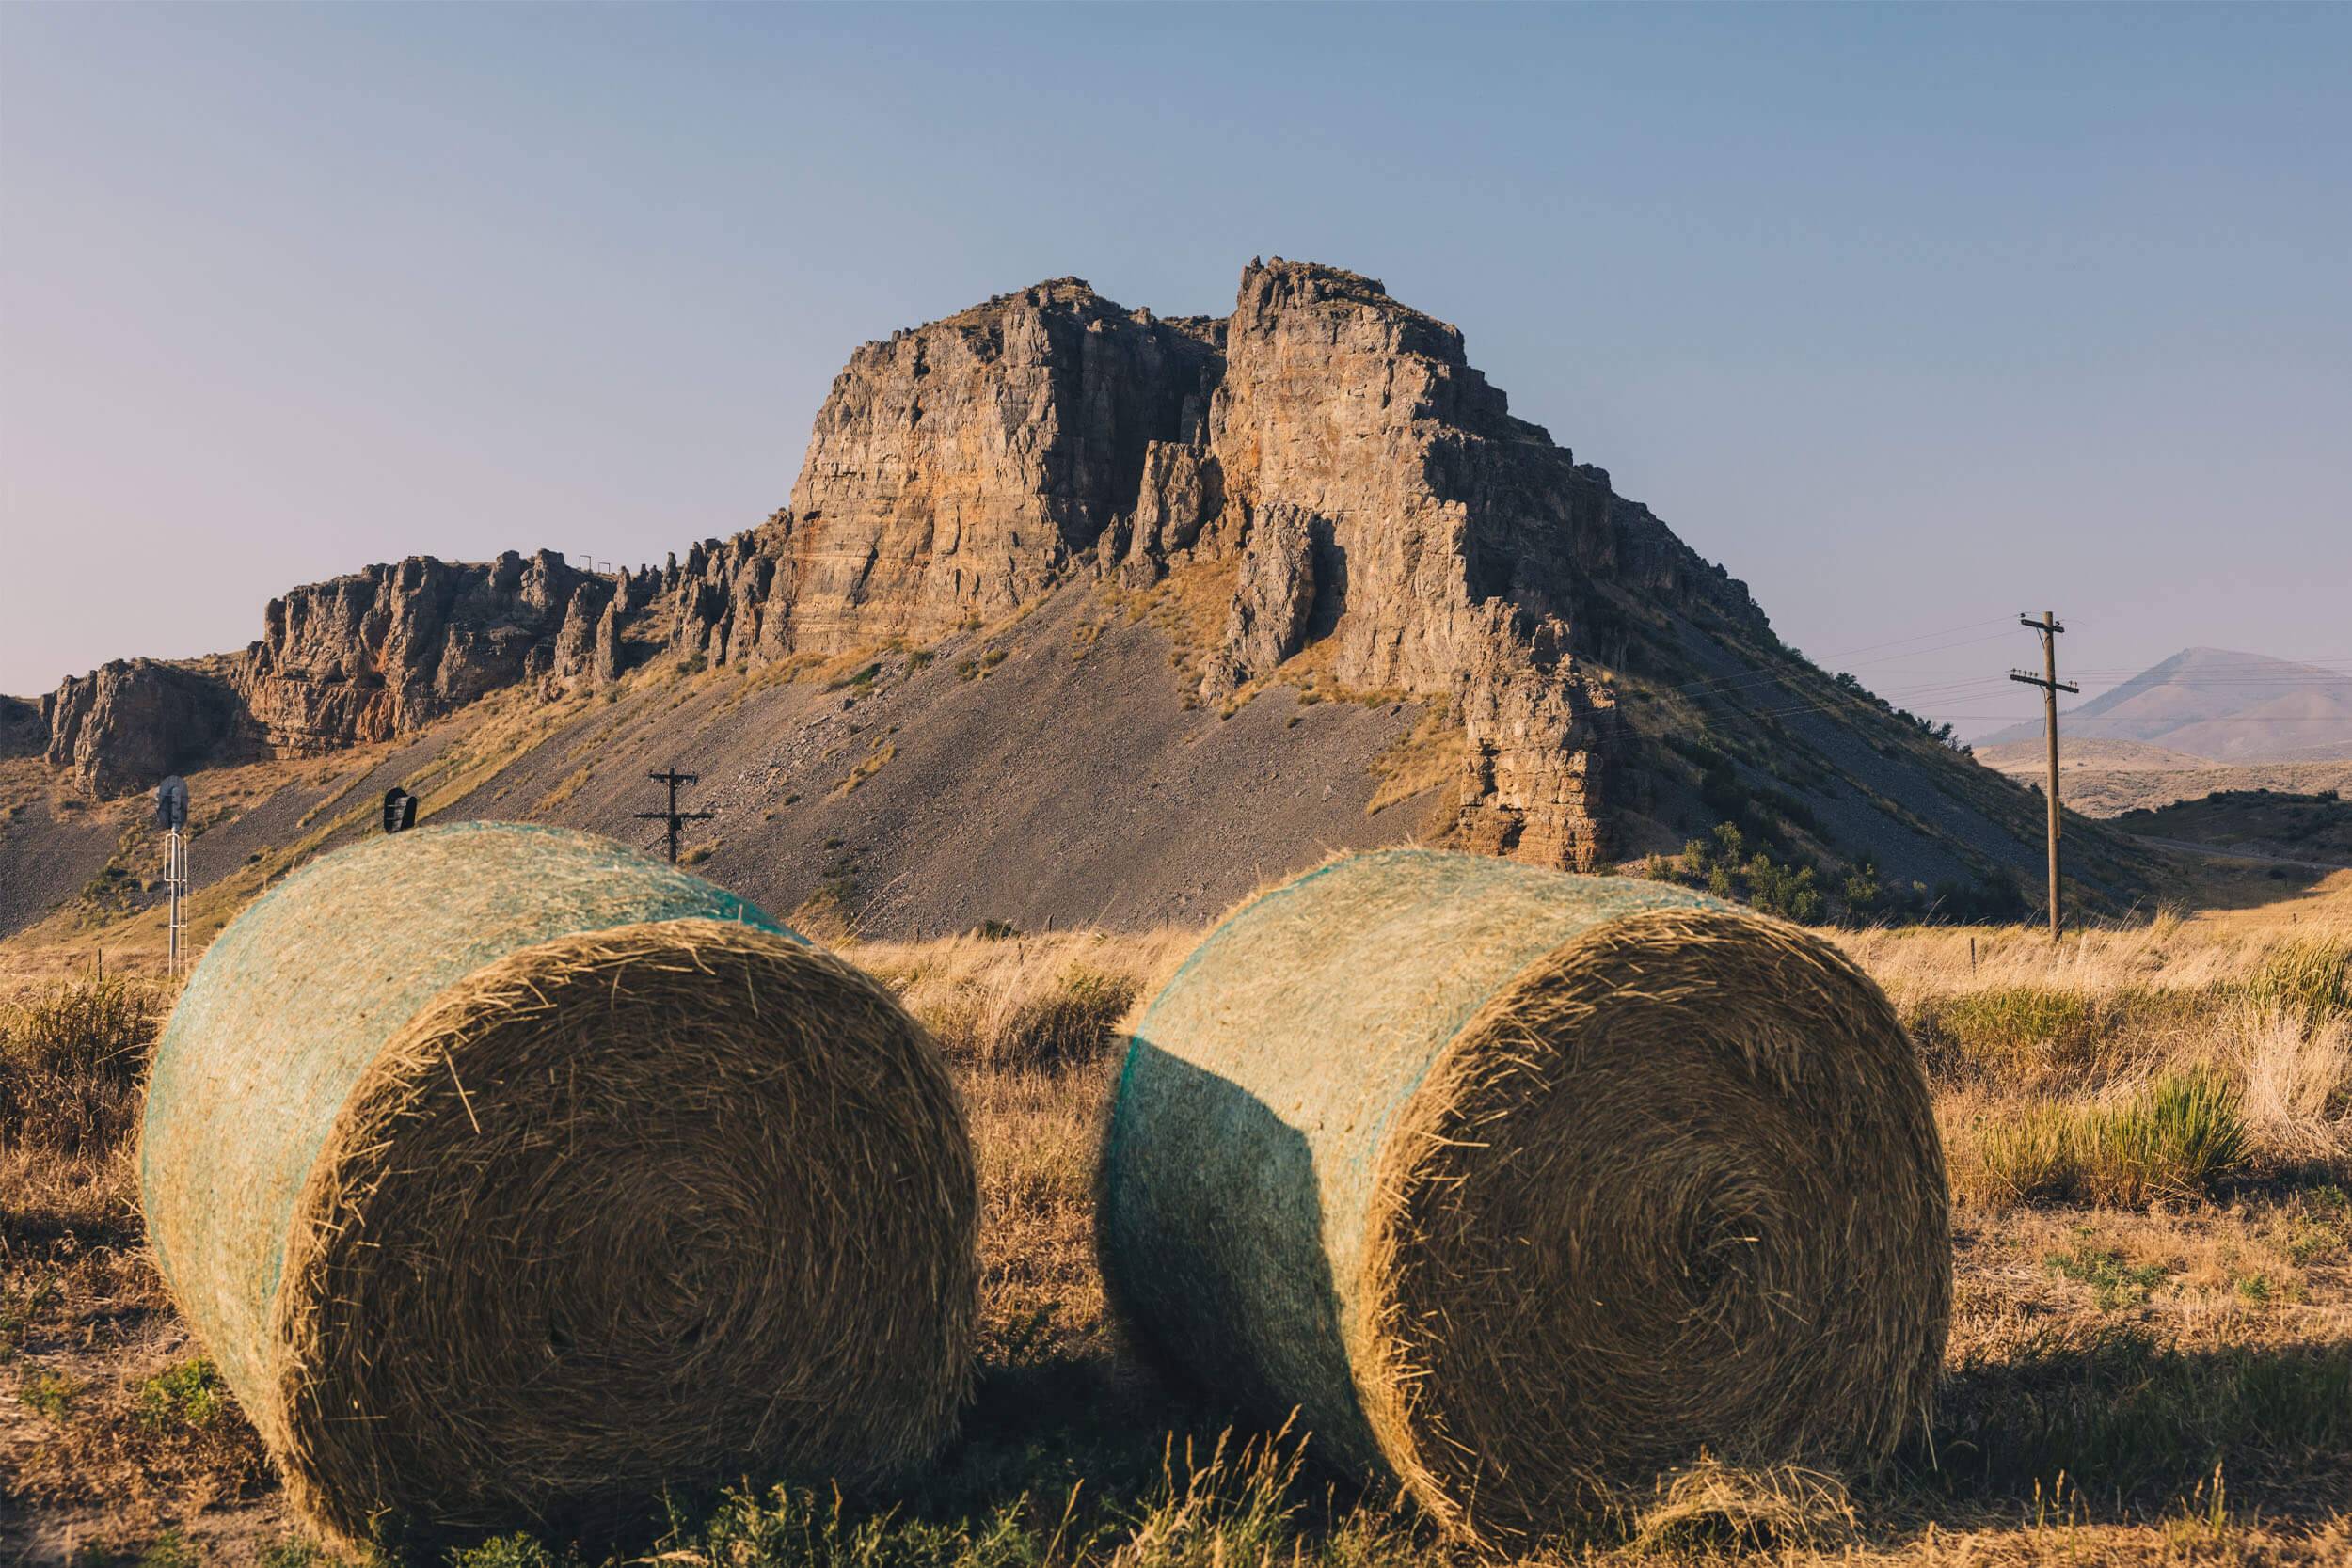 close up of two bales of hay, with Red Rock Pass in the backround